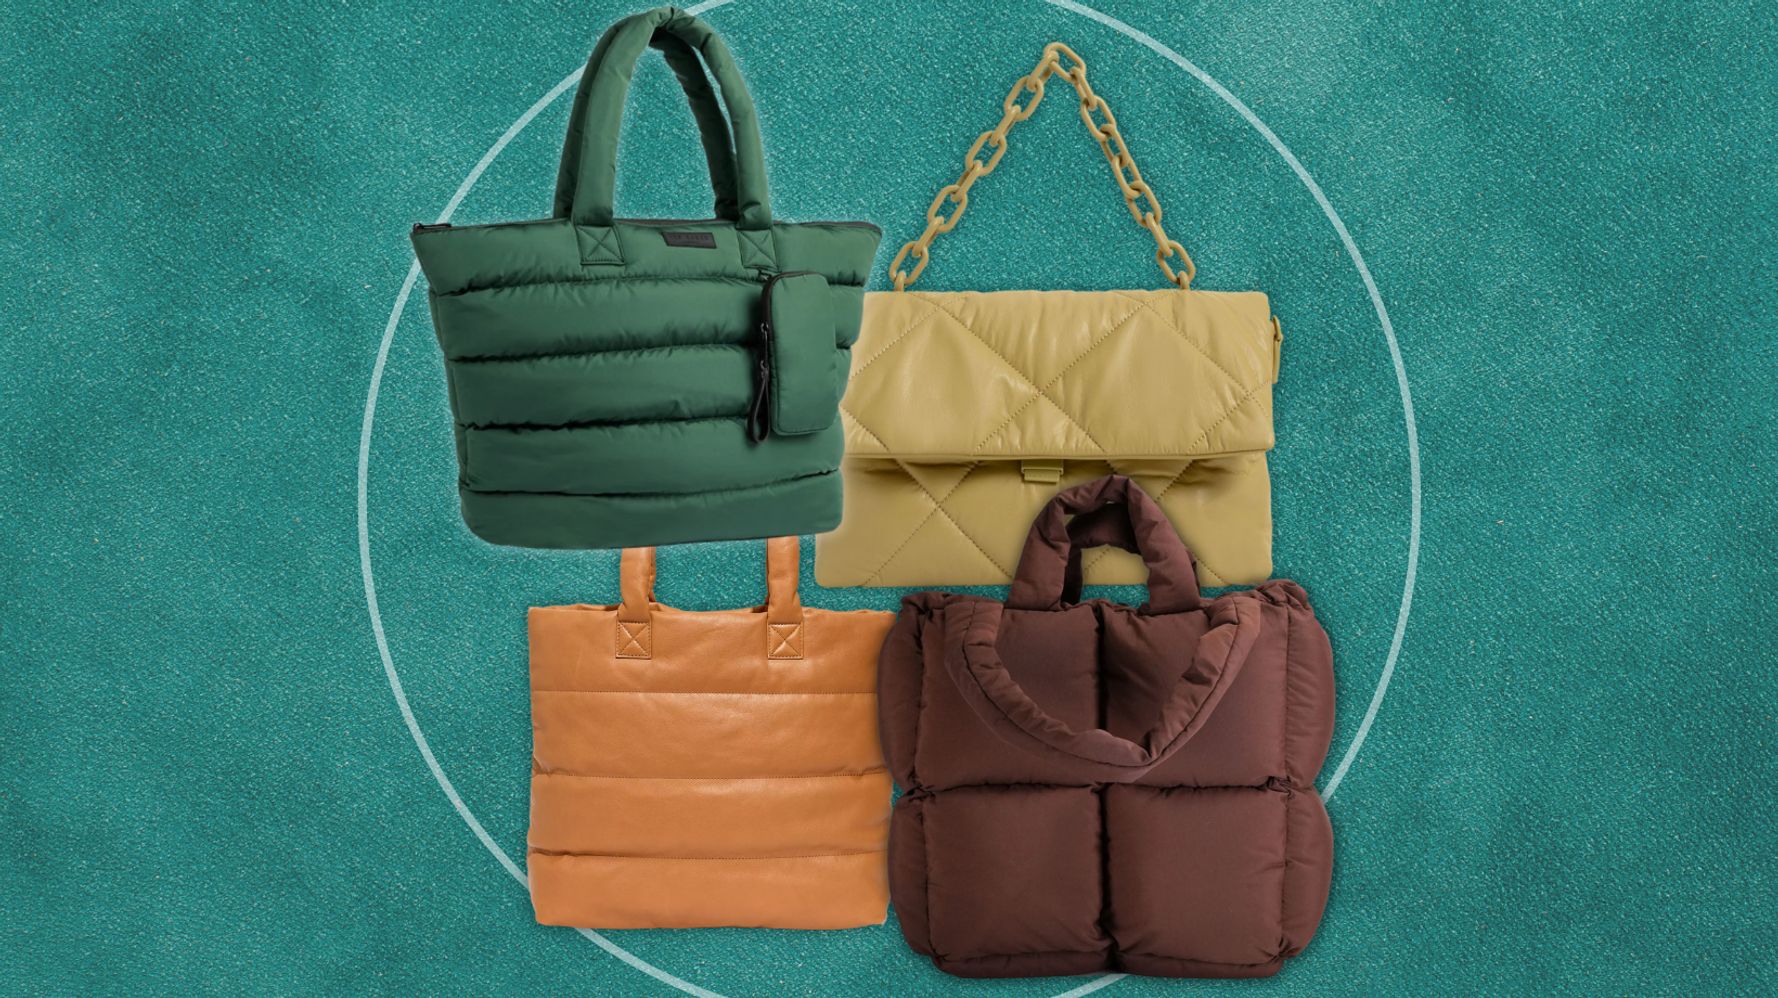 Shop The Trend: Puffer Bags To Add To Your Winter Accessories